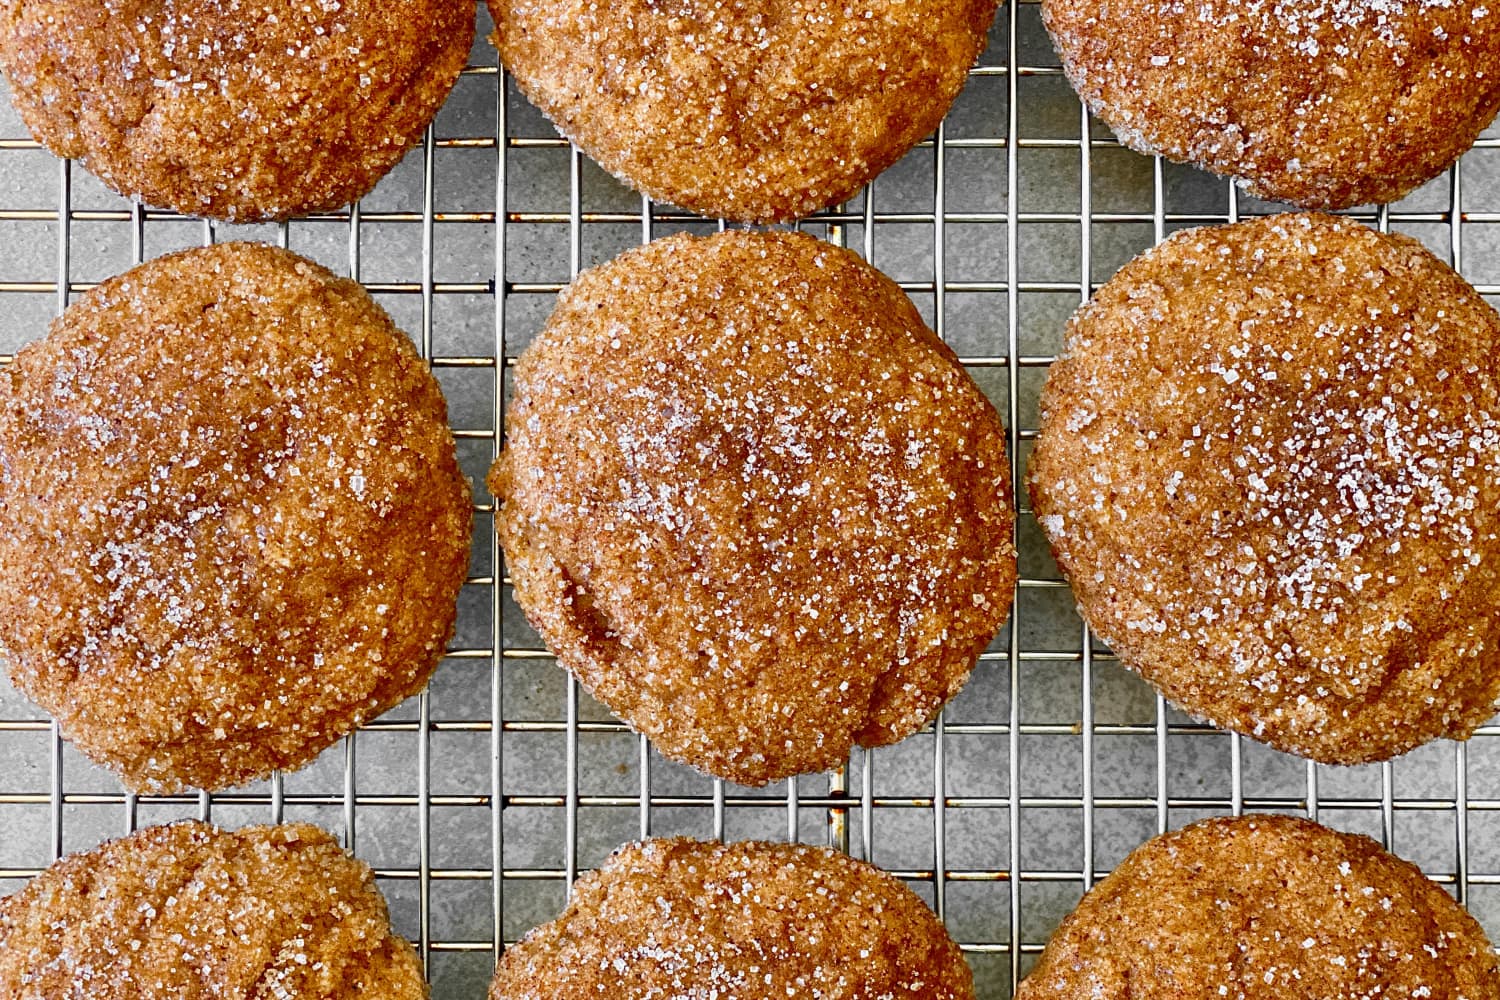 These Super-Soft Pumpkin Cookies Are So Good, I've Made Them 4 Times Already